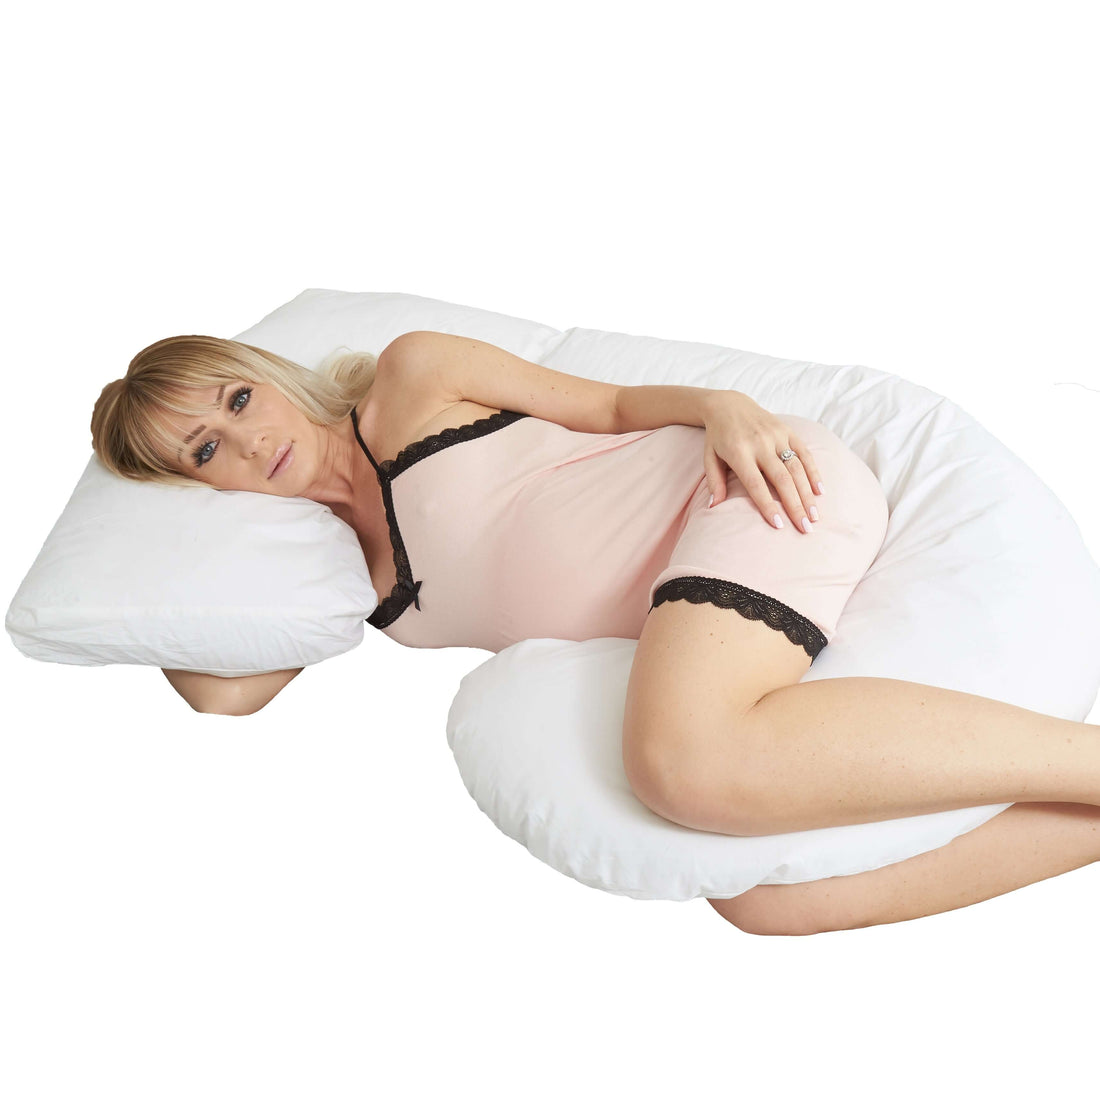 The Role of Body Pillows in Managing Back Pain and Discomfort